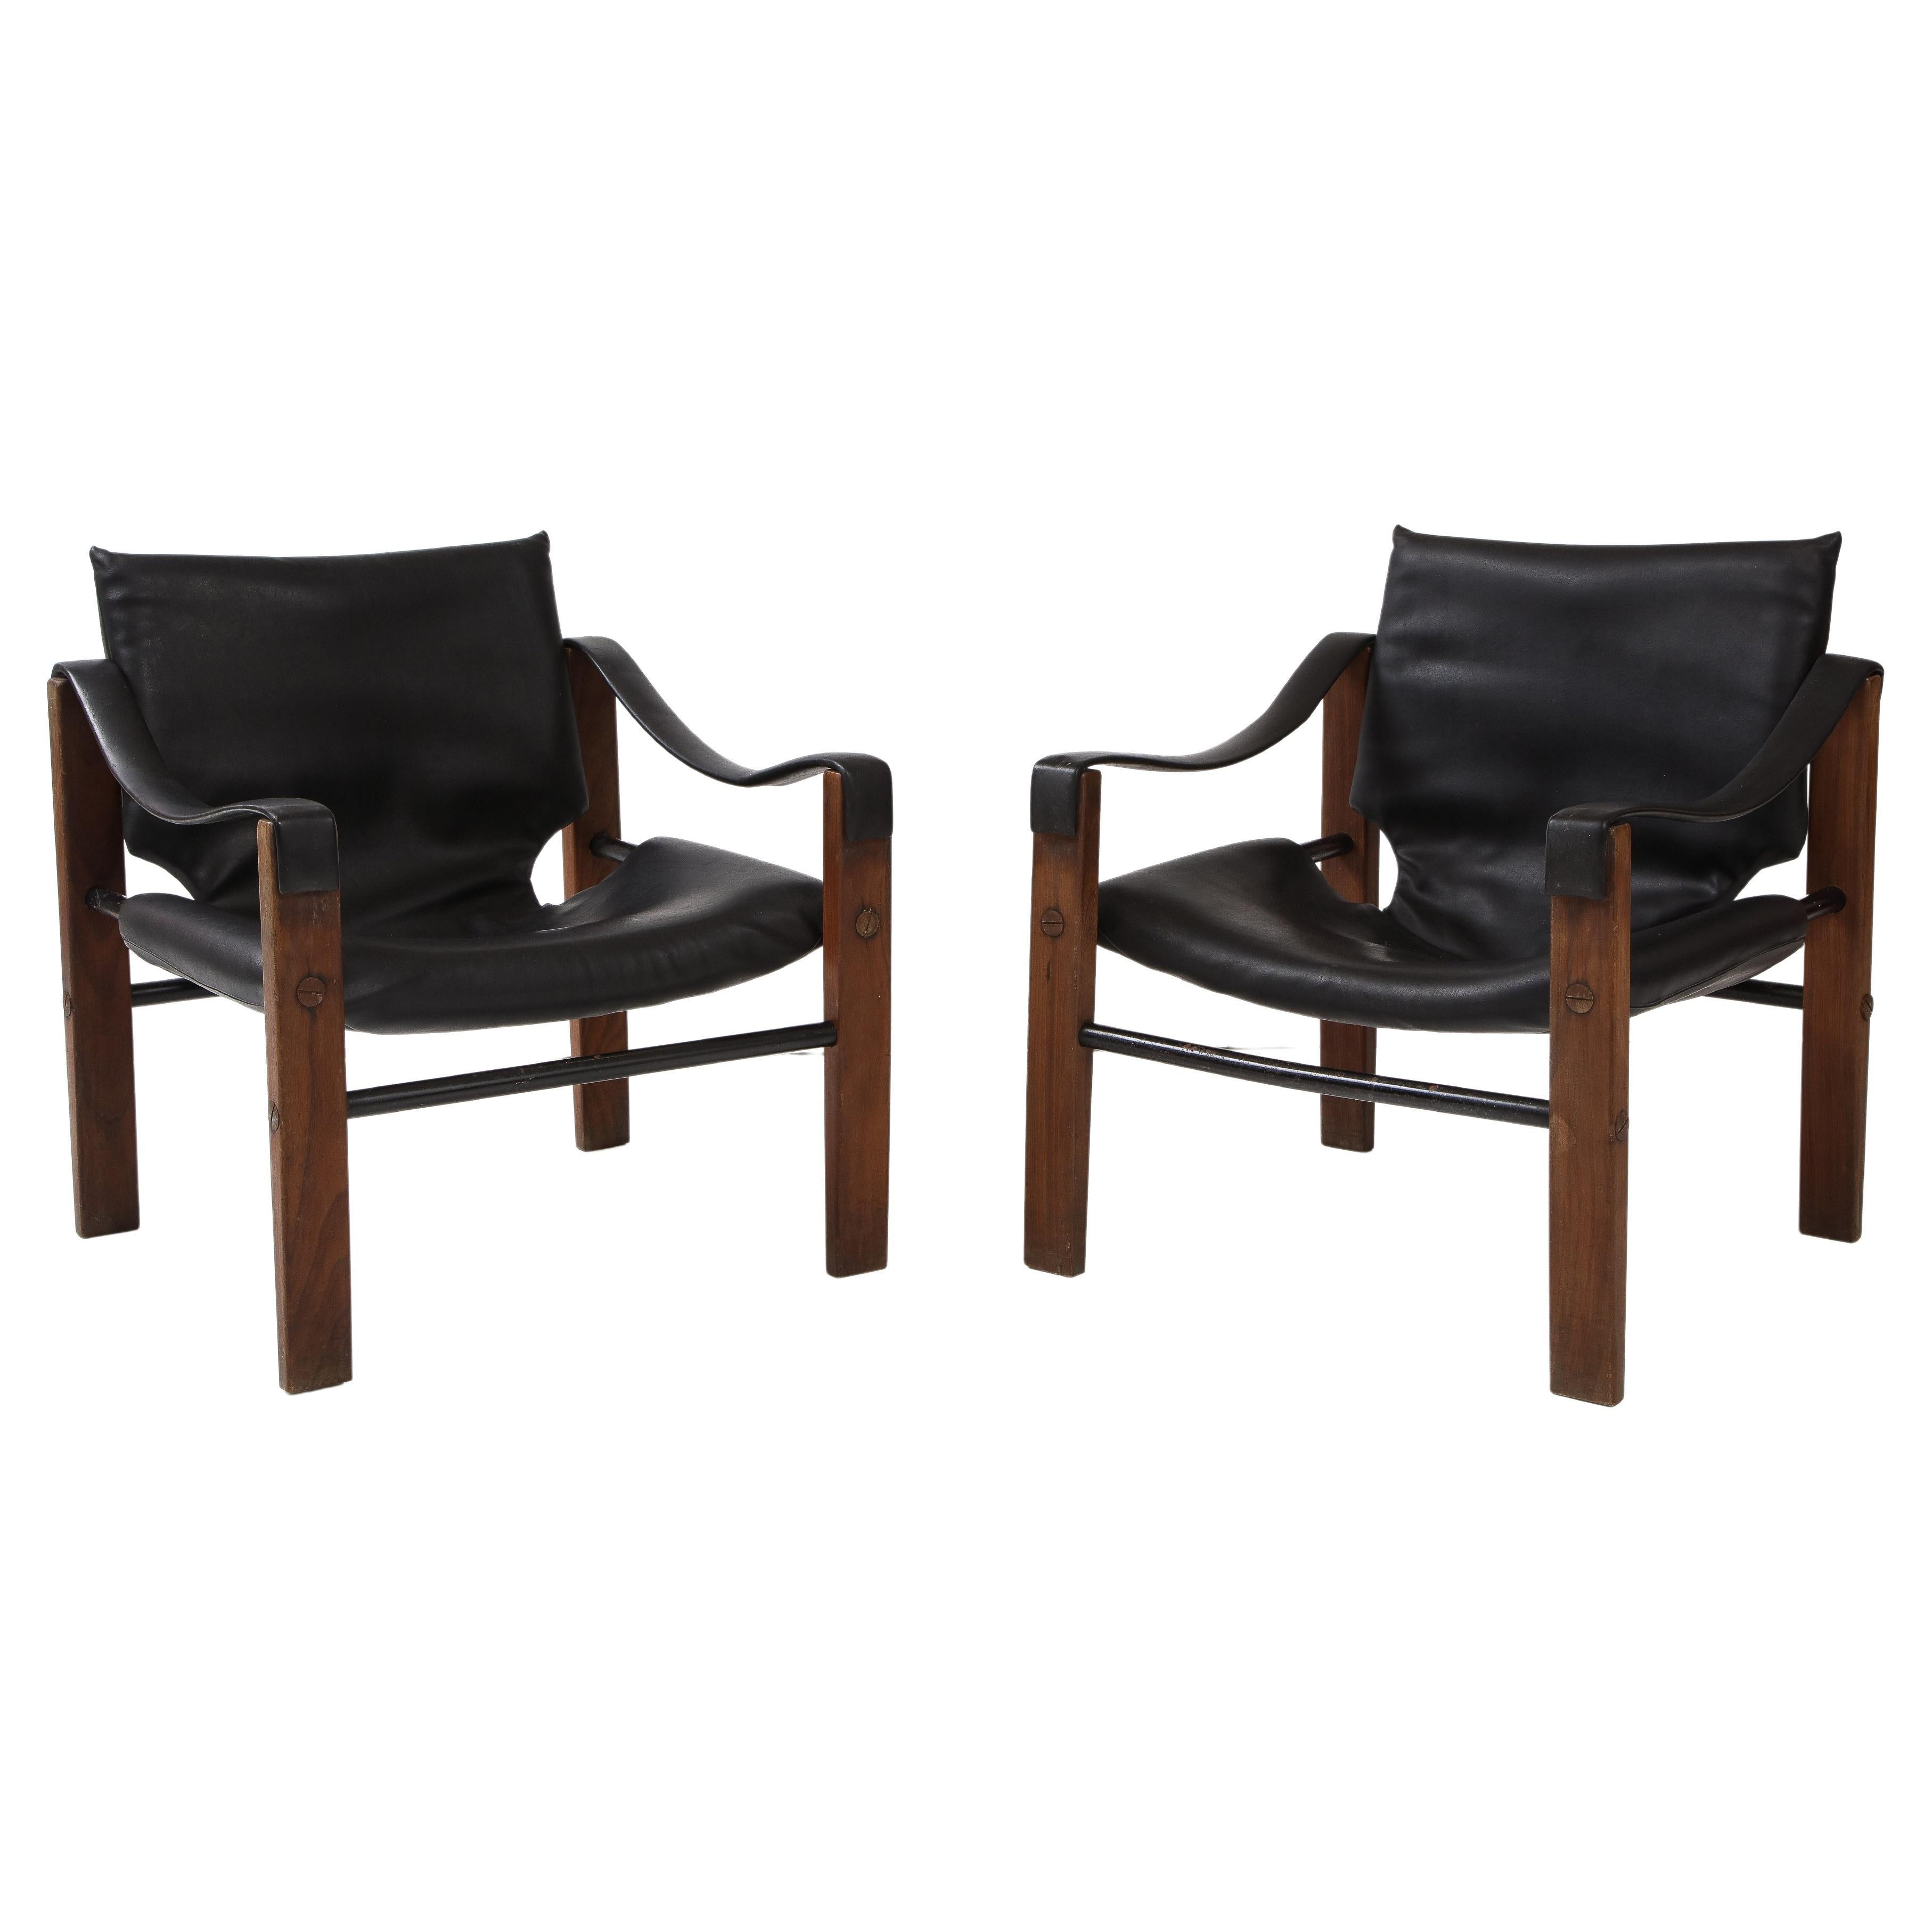 Pair of Black Leather “Safari” Chairs by Maurice Burke for Arkana